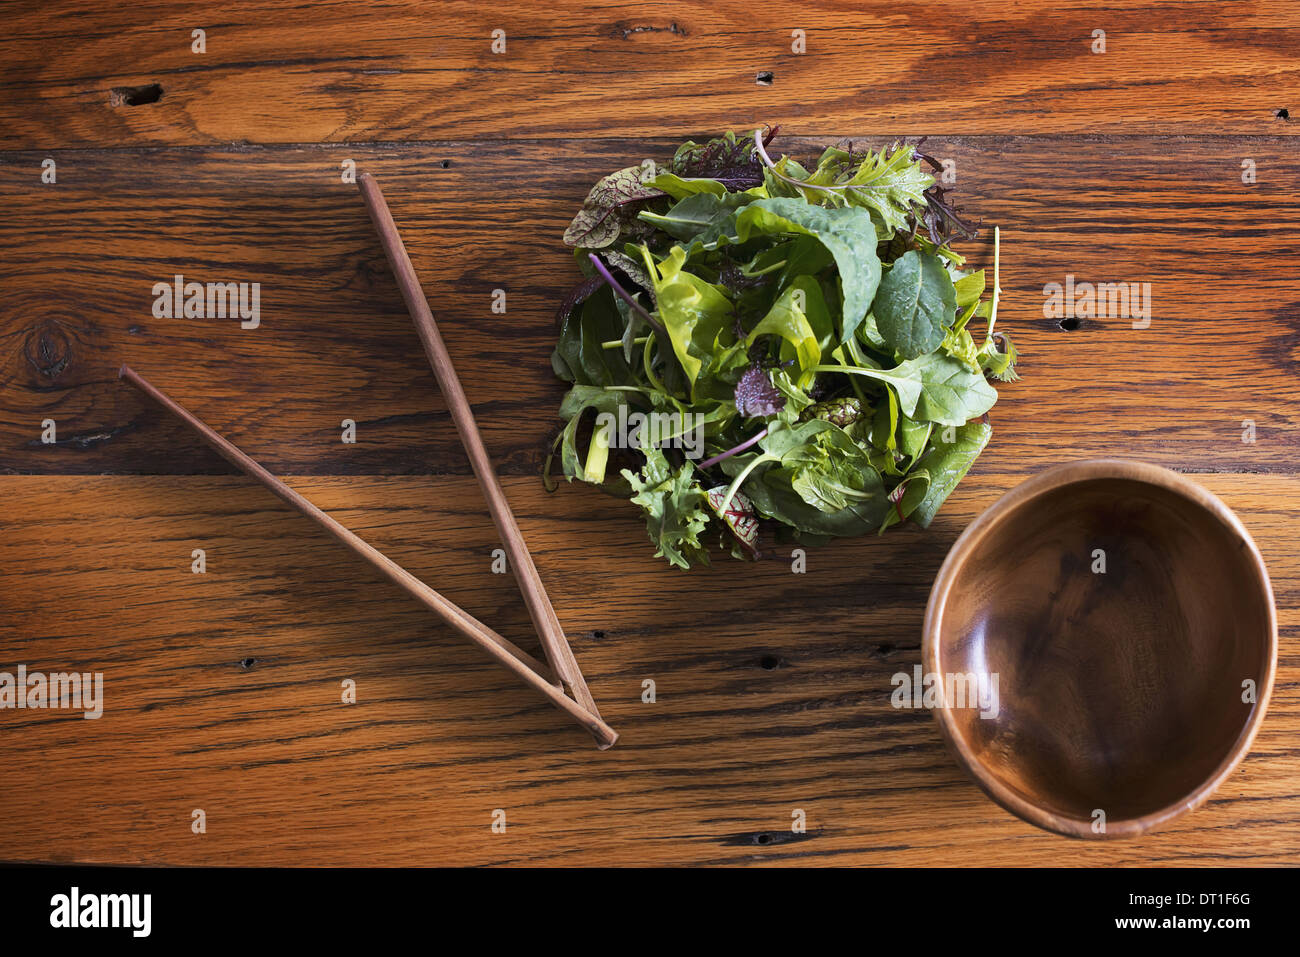 A small round polished wooden bowl and a clutch of organic mixed salad leaves with wooden chopsticks Stock Photo